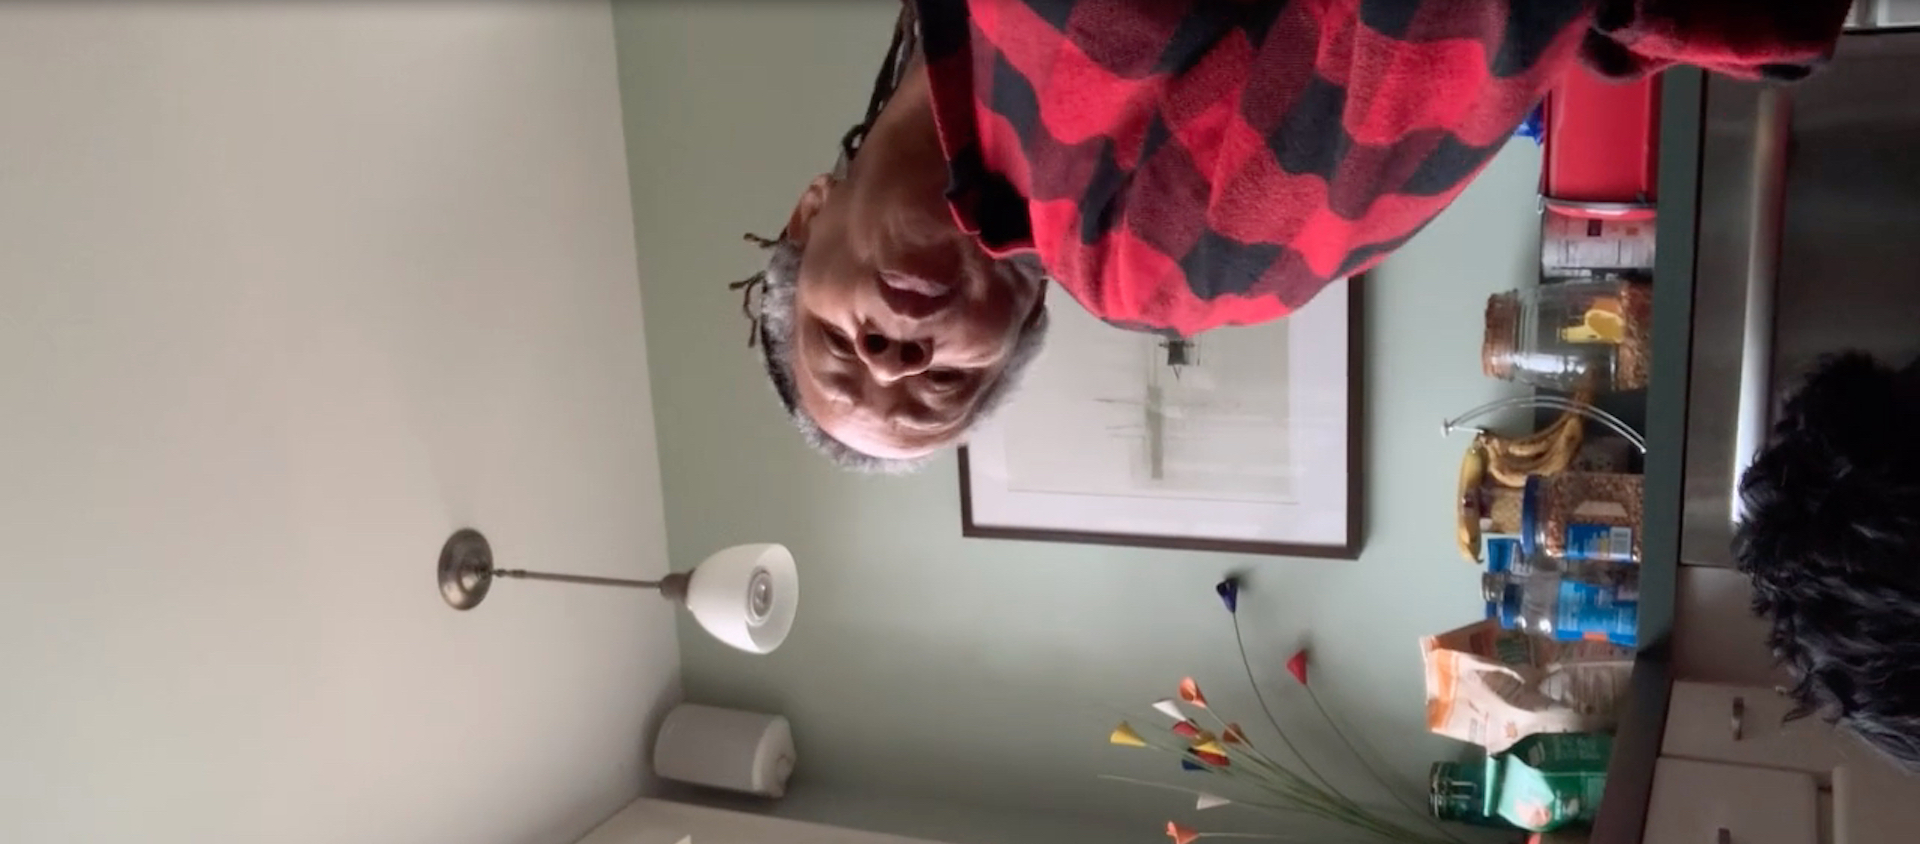 Dancer and choreographer Bebe Miller performs a movement work in her home, captured on a phone attached to her foot, which turns the view of the room sideways